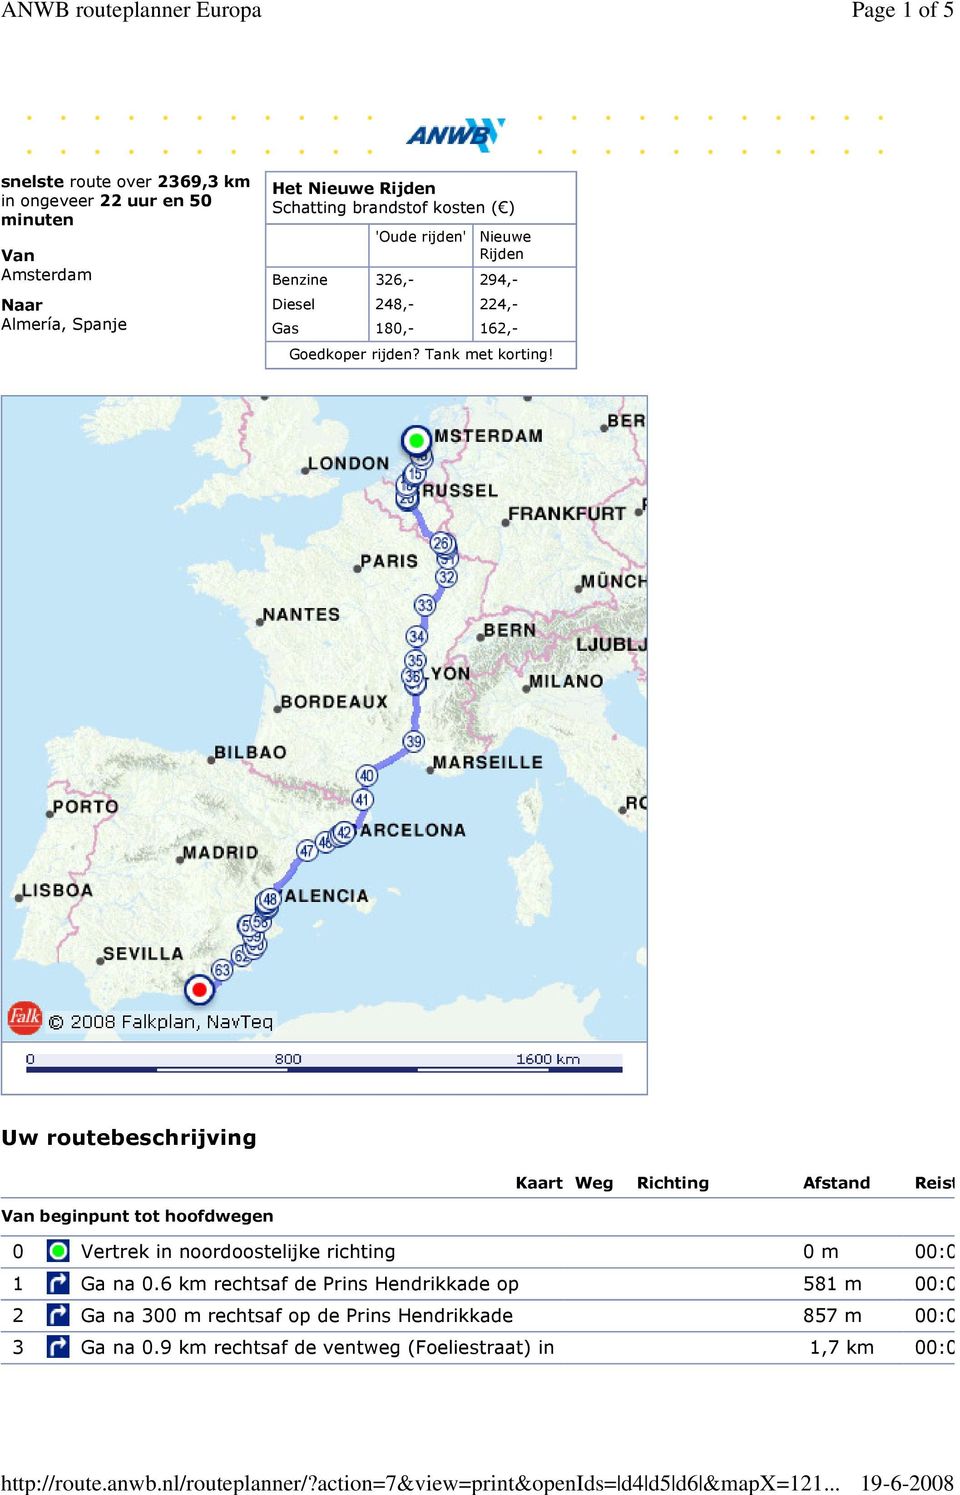 ANWB routeplanner Europa - PDF Free Download